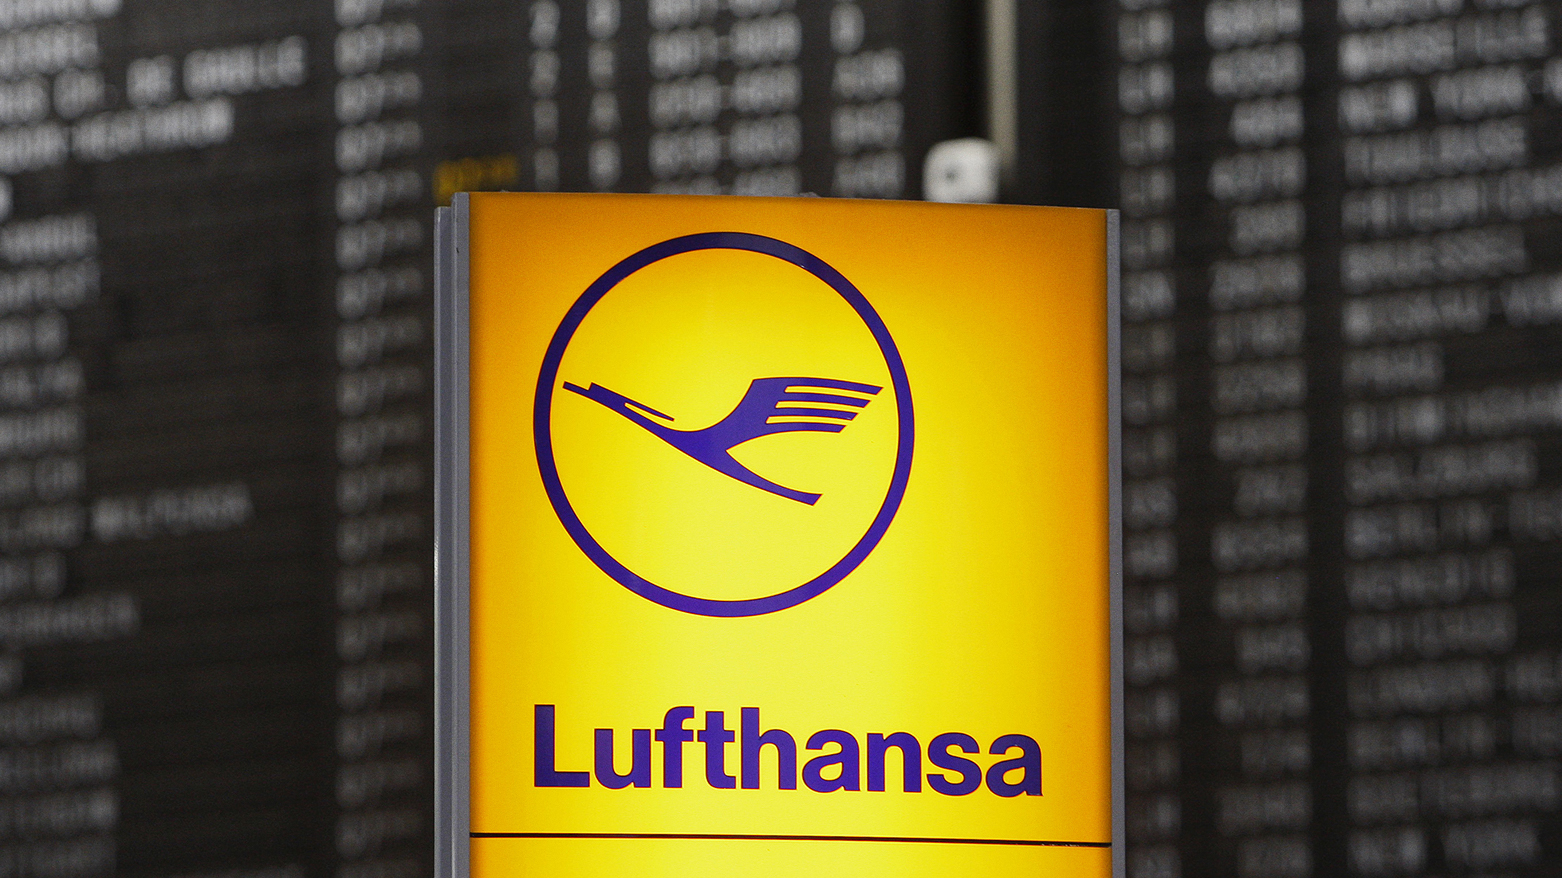 The logo of German airline Lufthansa is seen in front of a display panel at the airport in Frankfurt, central Germany, on Friday, Aug. 1, 2008. (Photo: AP/Daniel Roland)